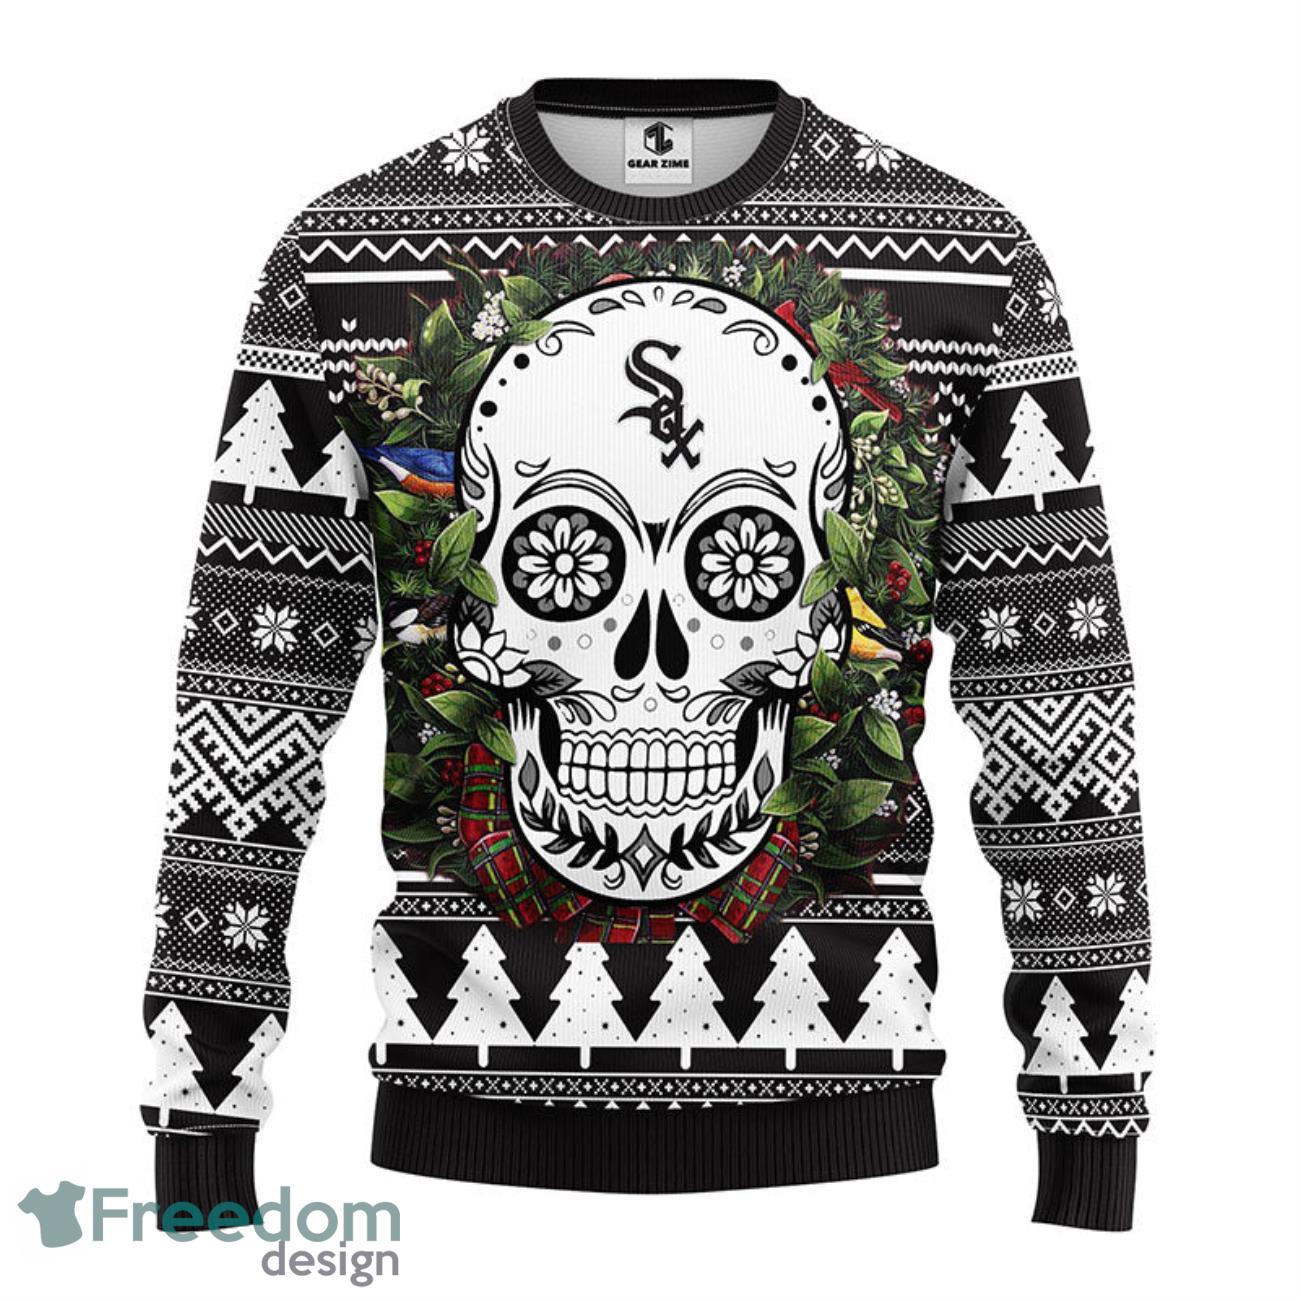 Chicago White Sox Shirts, Sweaters, White Sox Ugly Sweaters, Dress Shirts